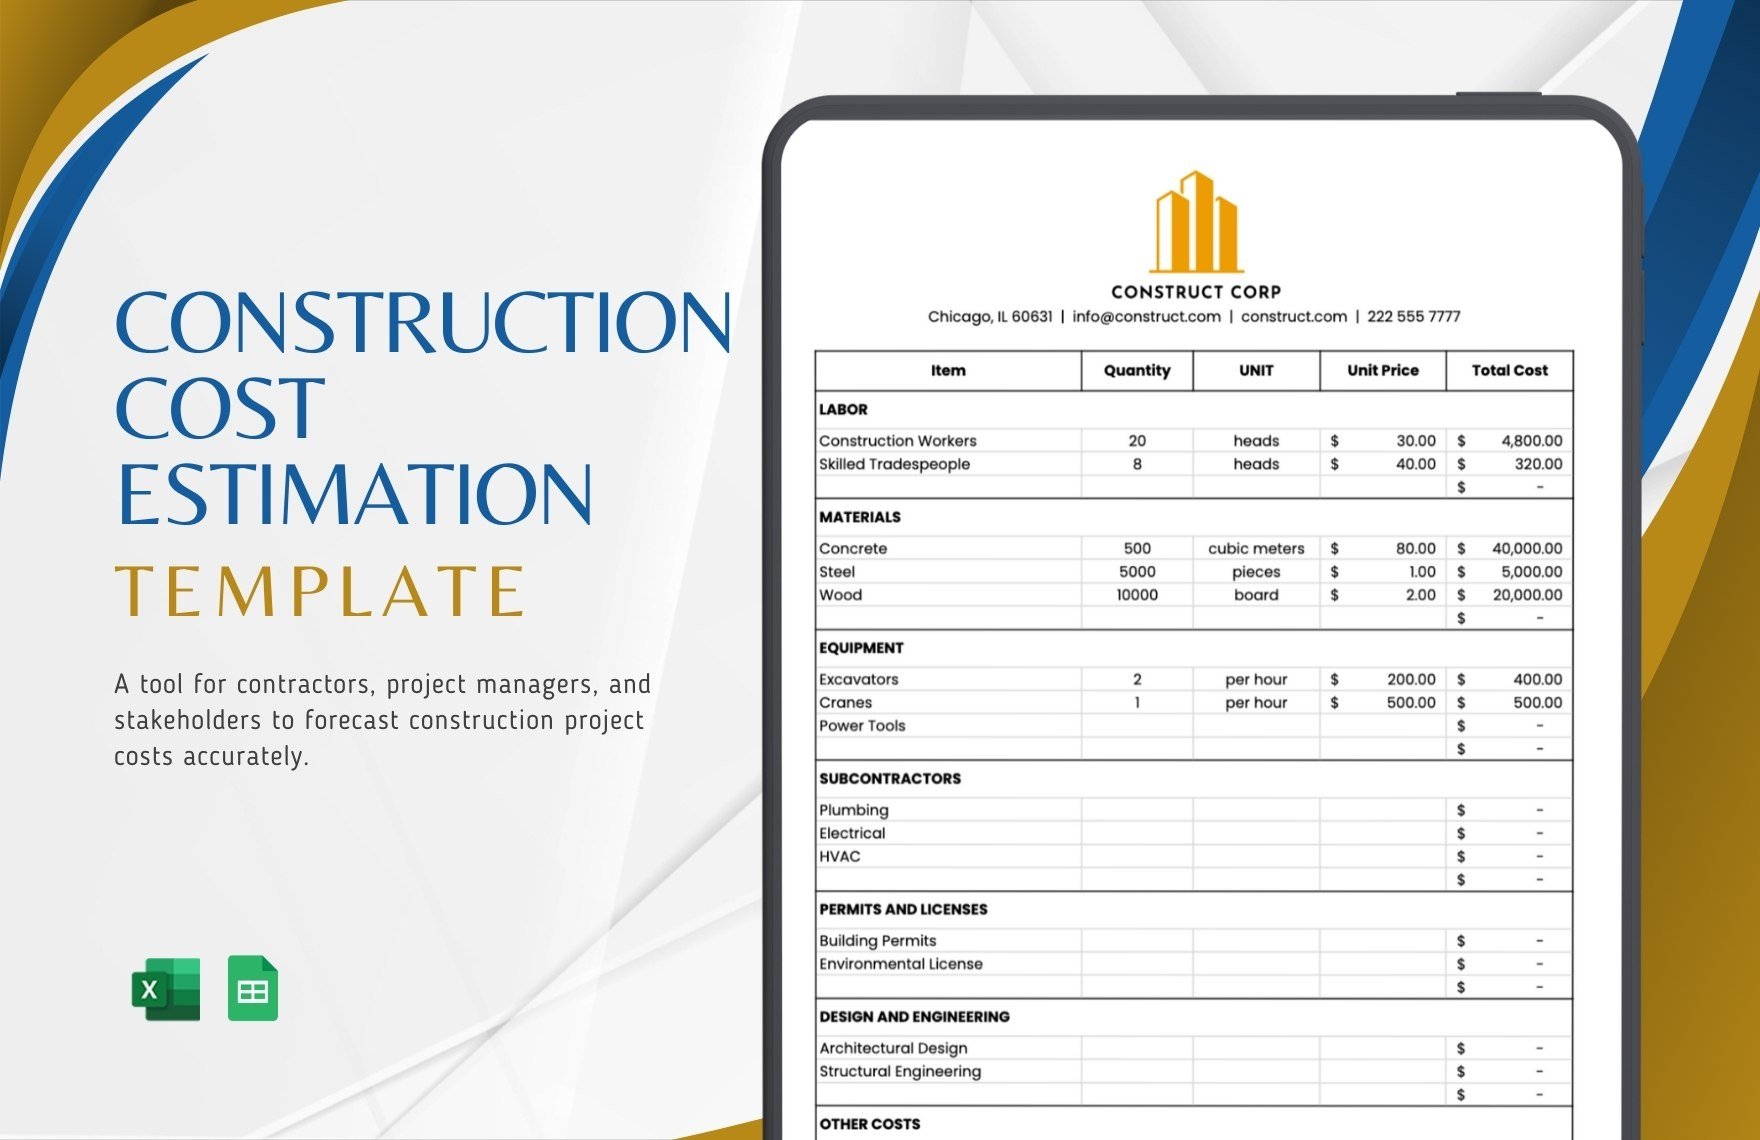 Construction Cost Estimation in Excel, Google Sheets